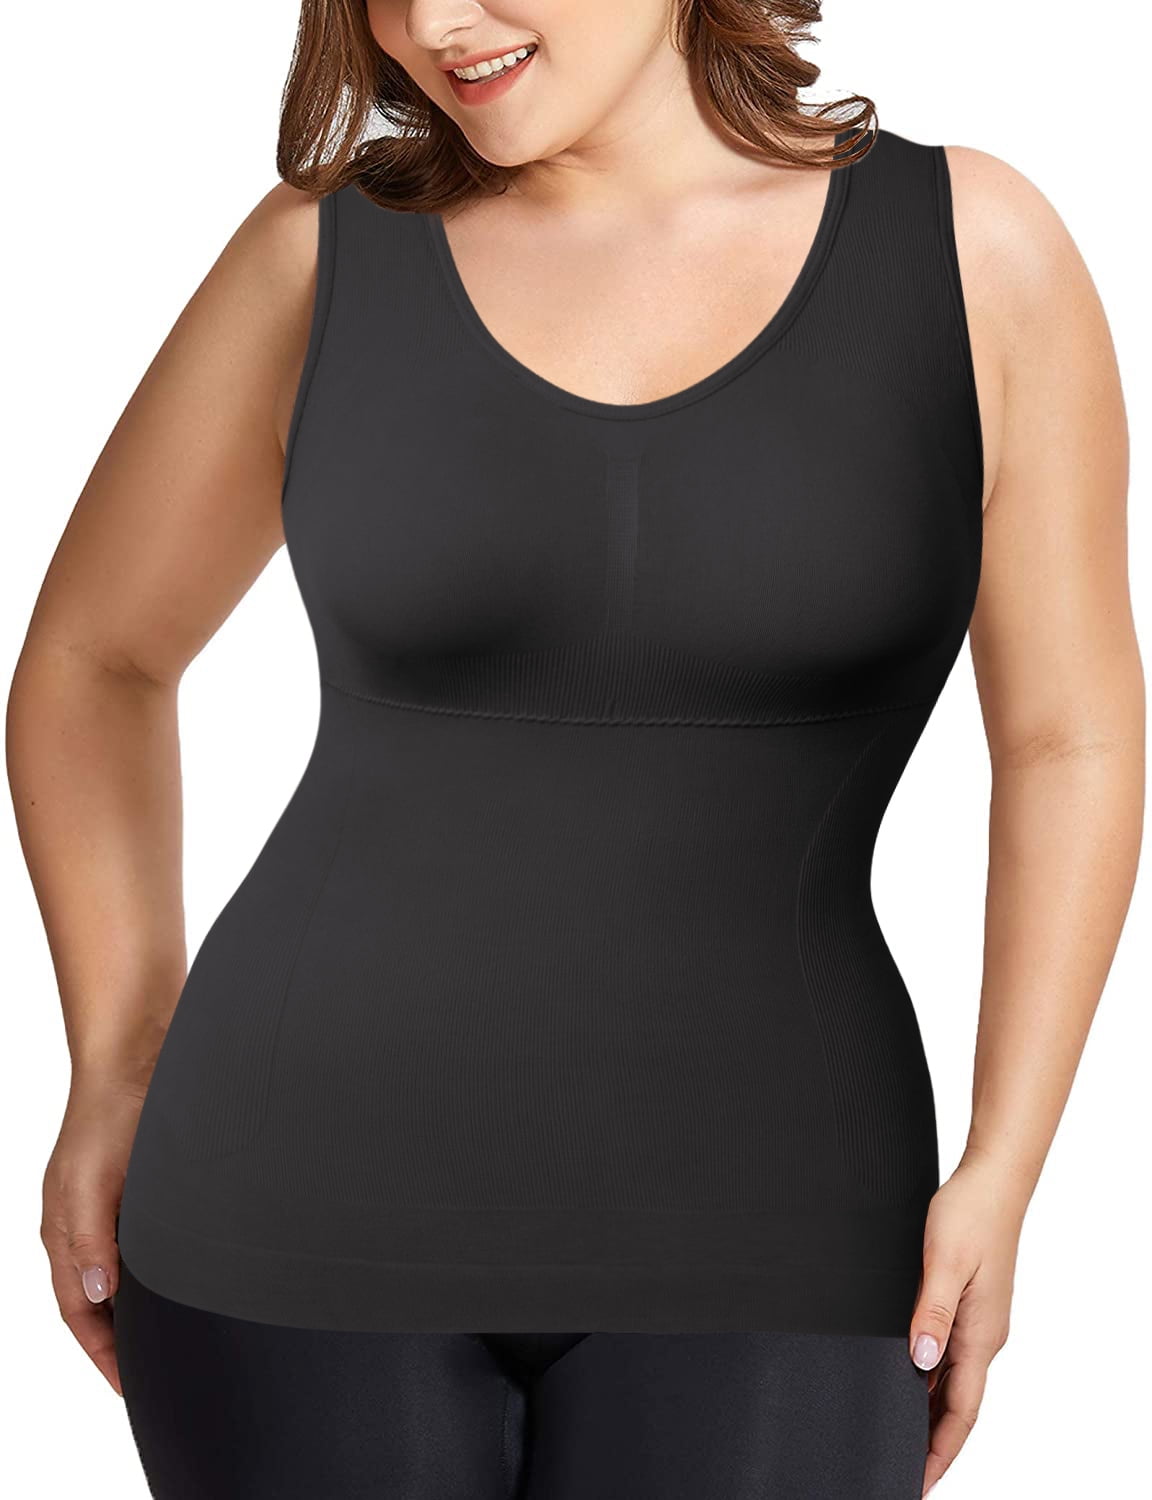 COMFREE Womens Cami Shaper Plus Size with Built in Palestine